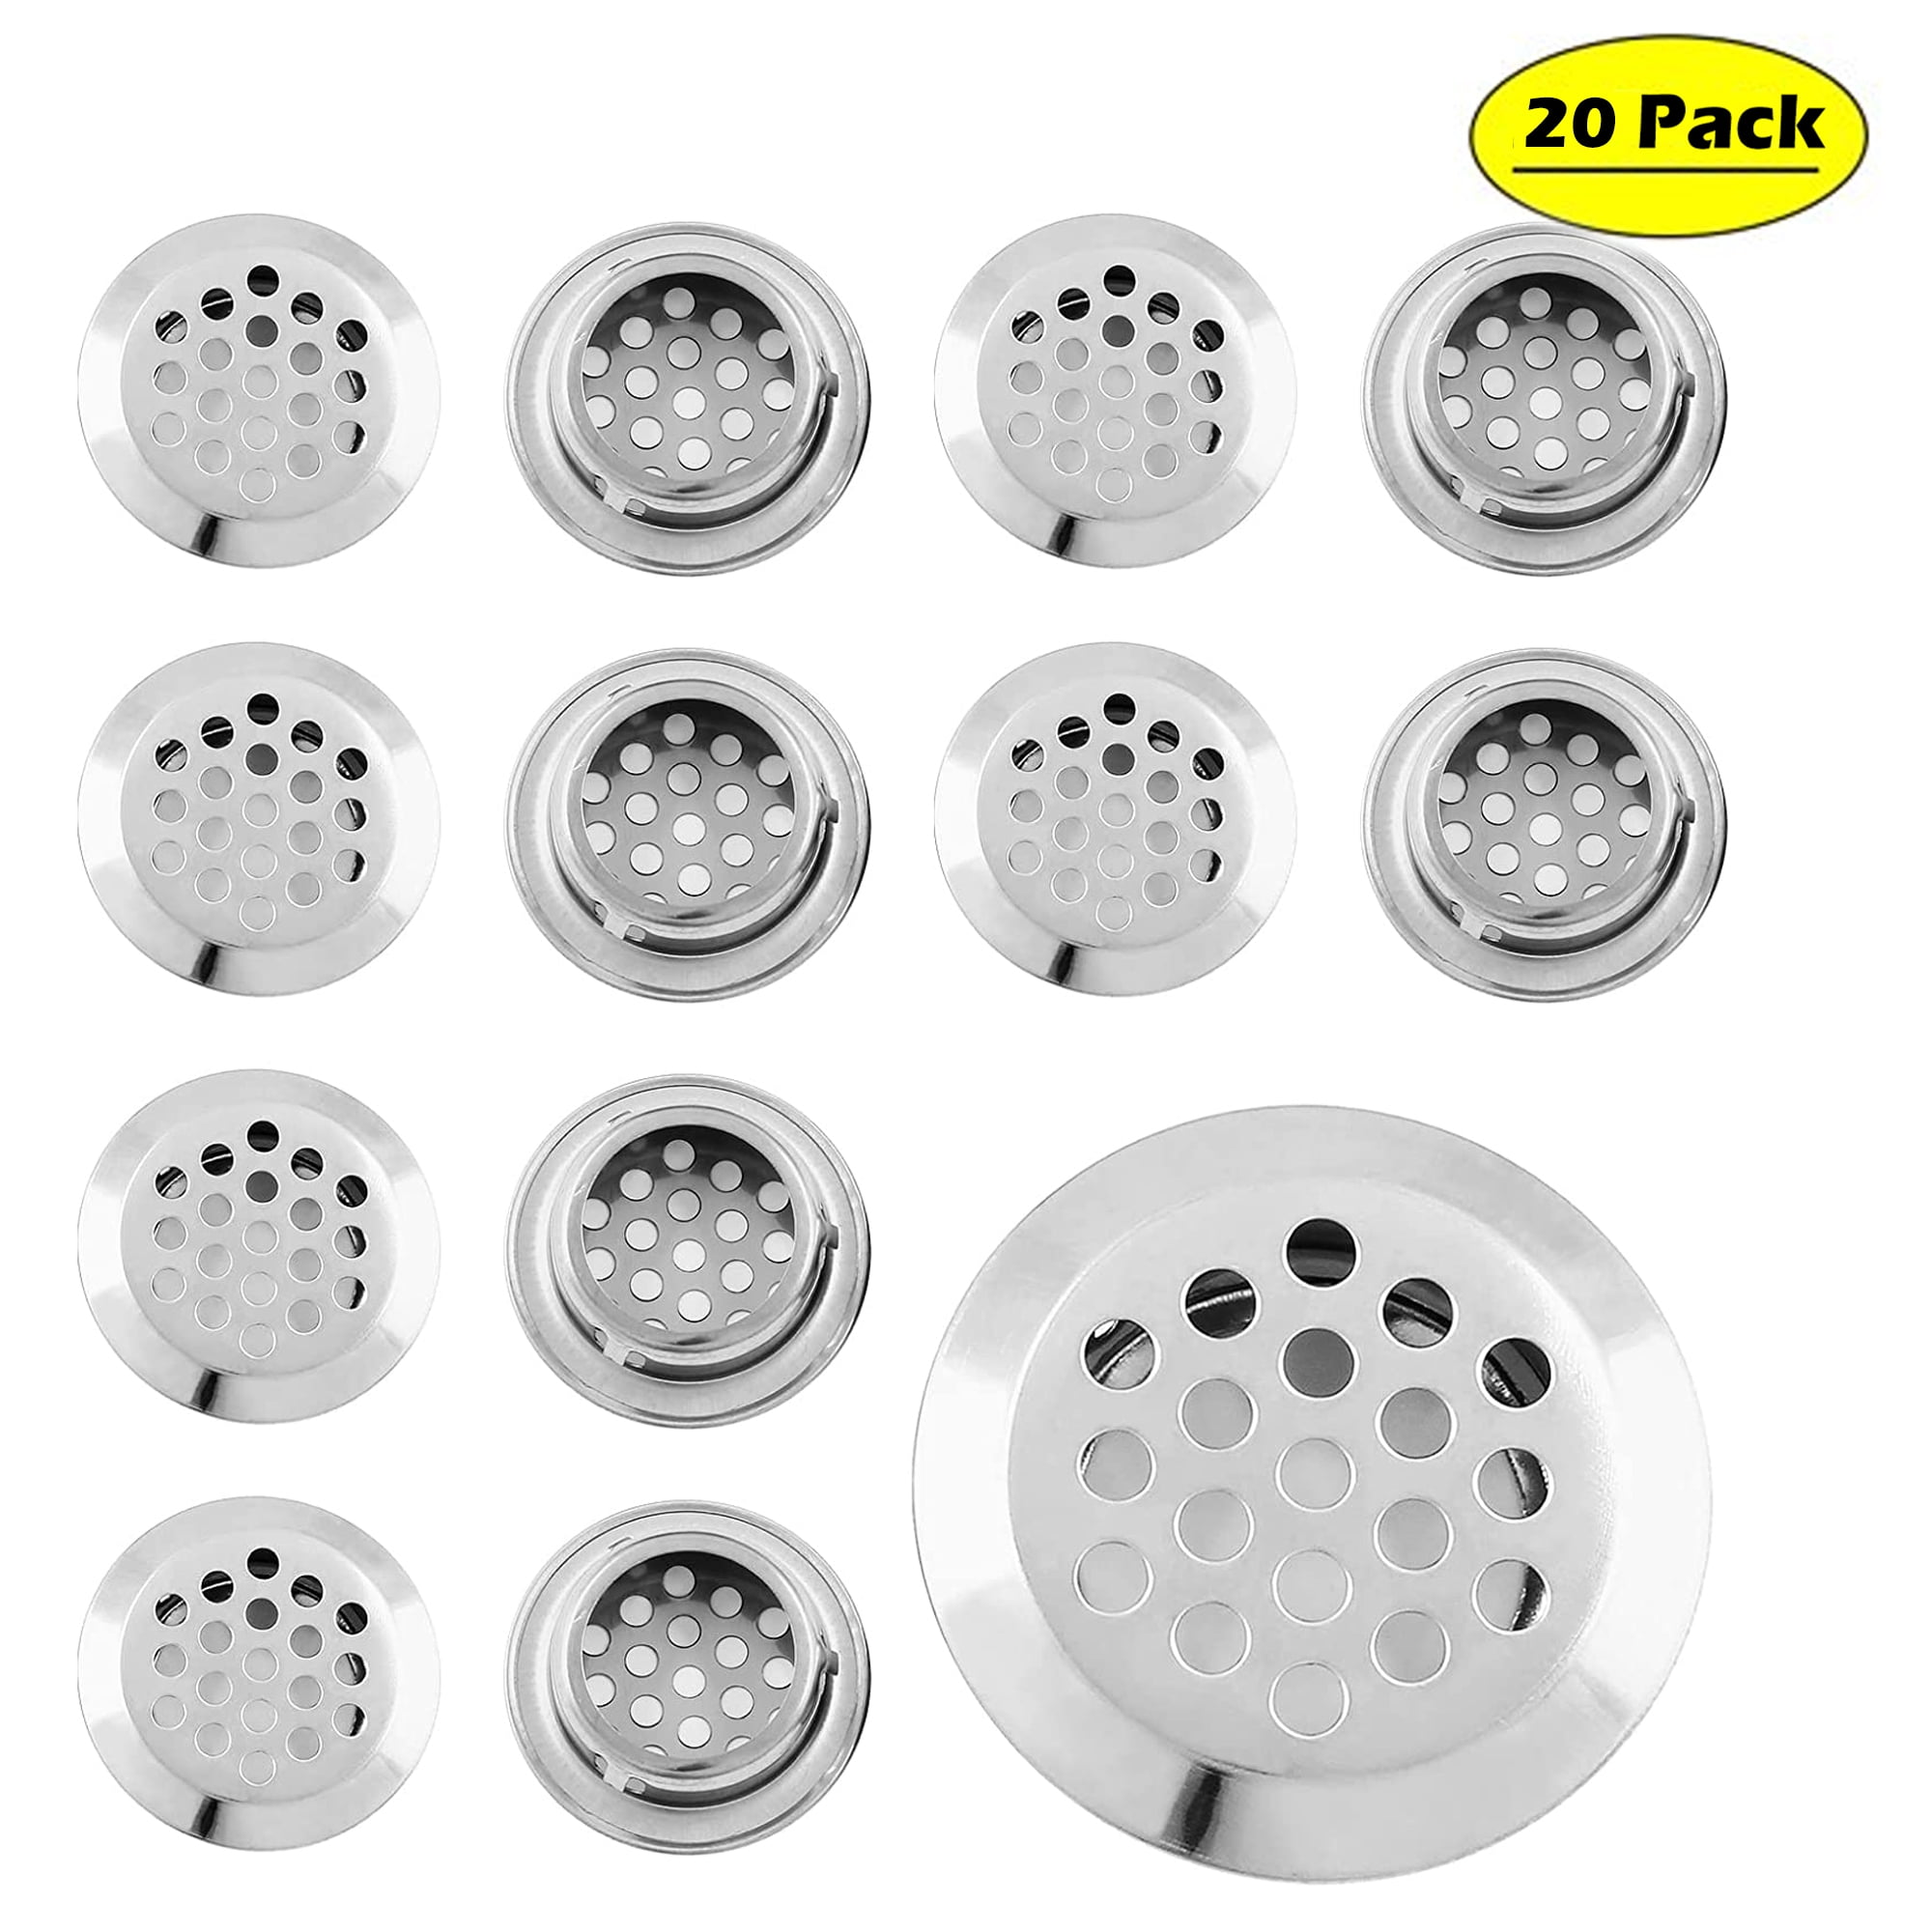 Breathable Ventilation Air Vent Grille Cupboard Wardrobe Set of 20pcs 